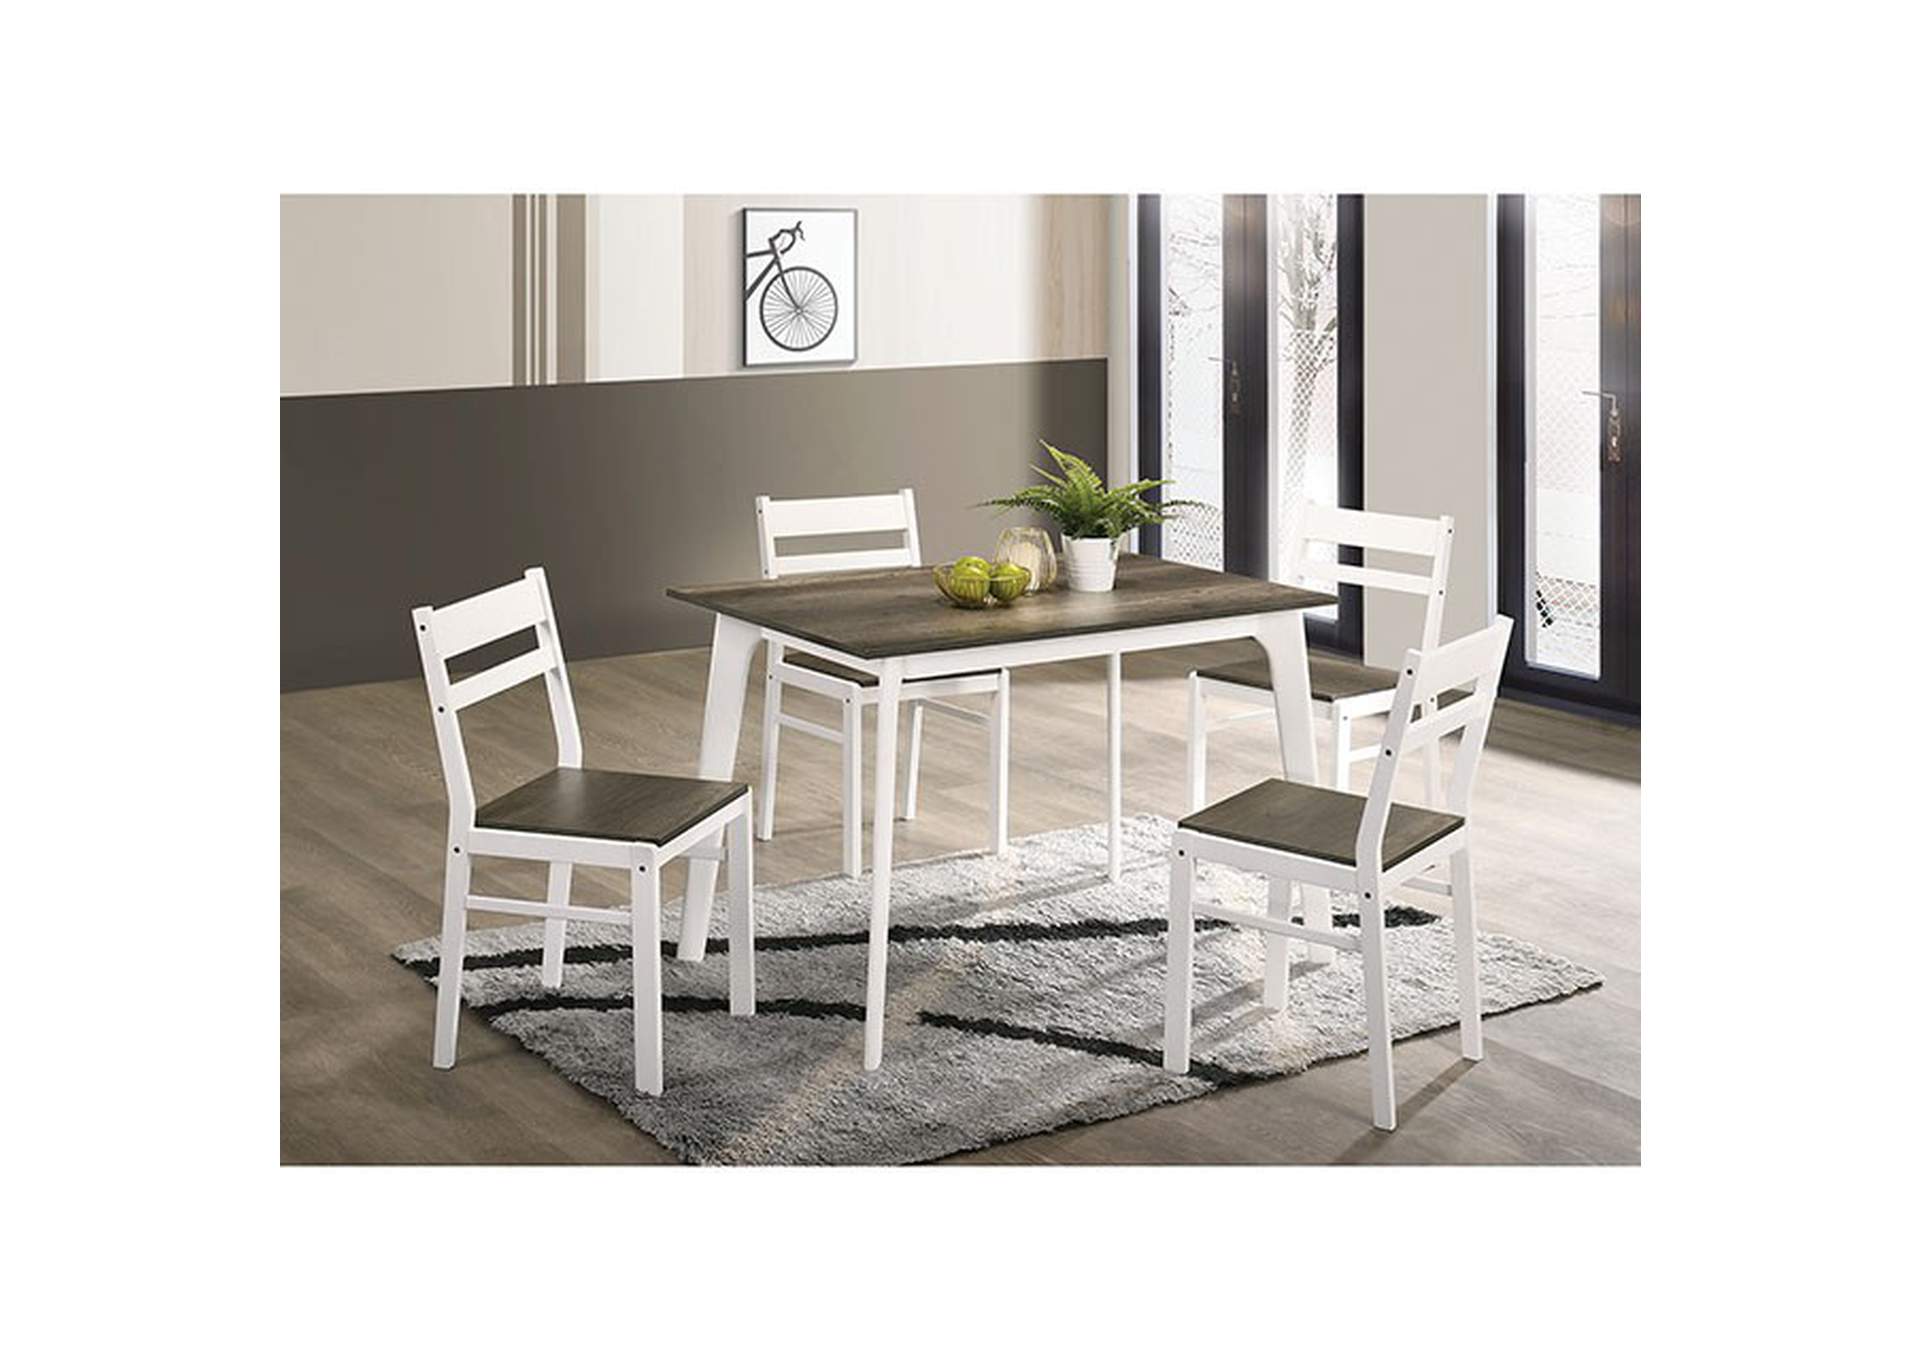 Debbie 5 Pc. Dining Table Set,Furniture of America